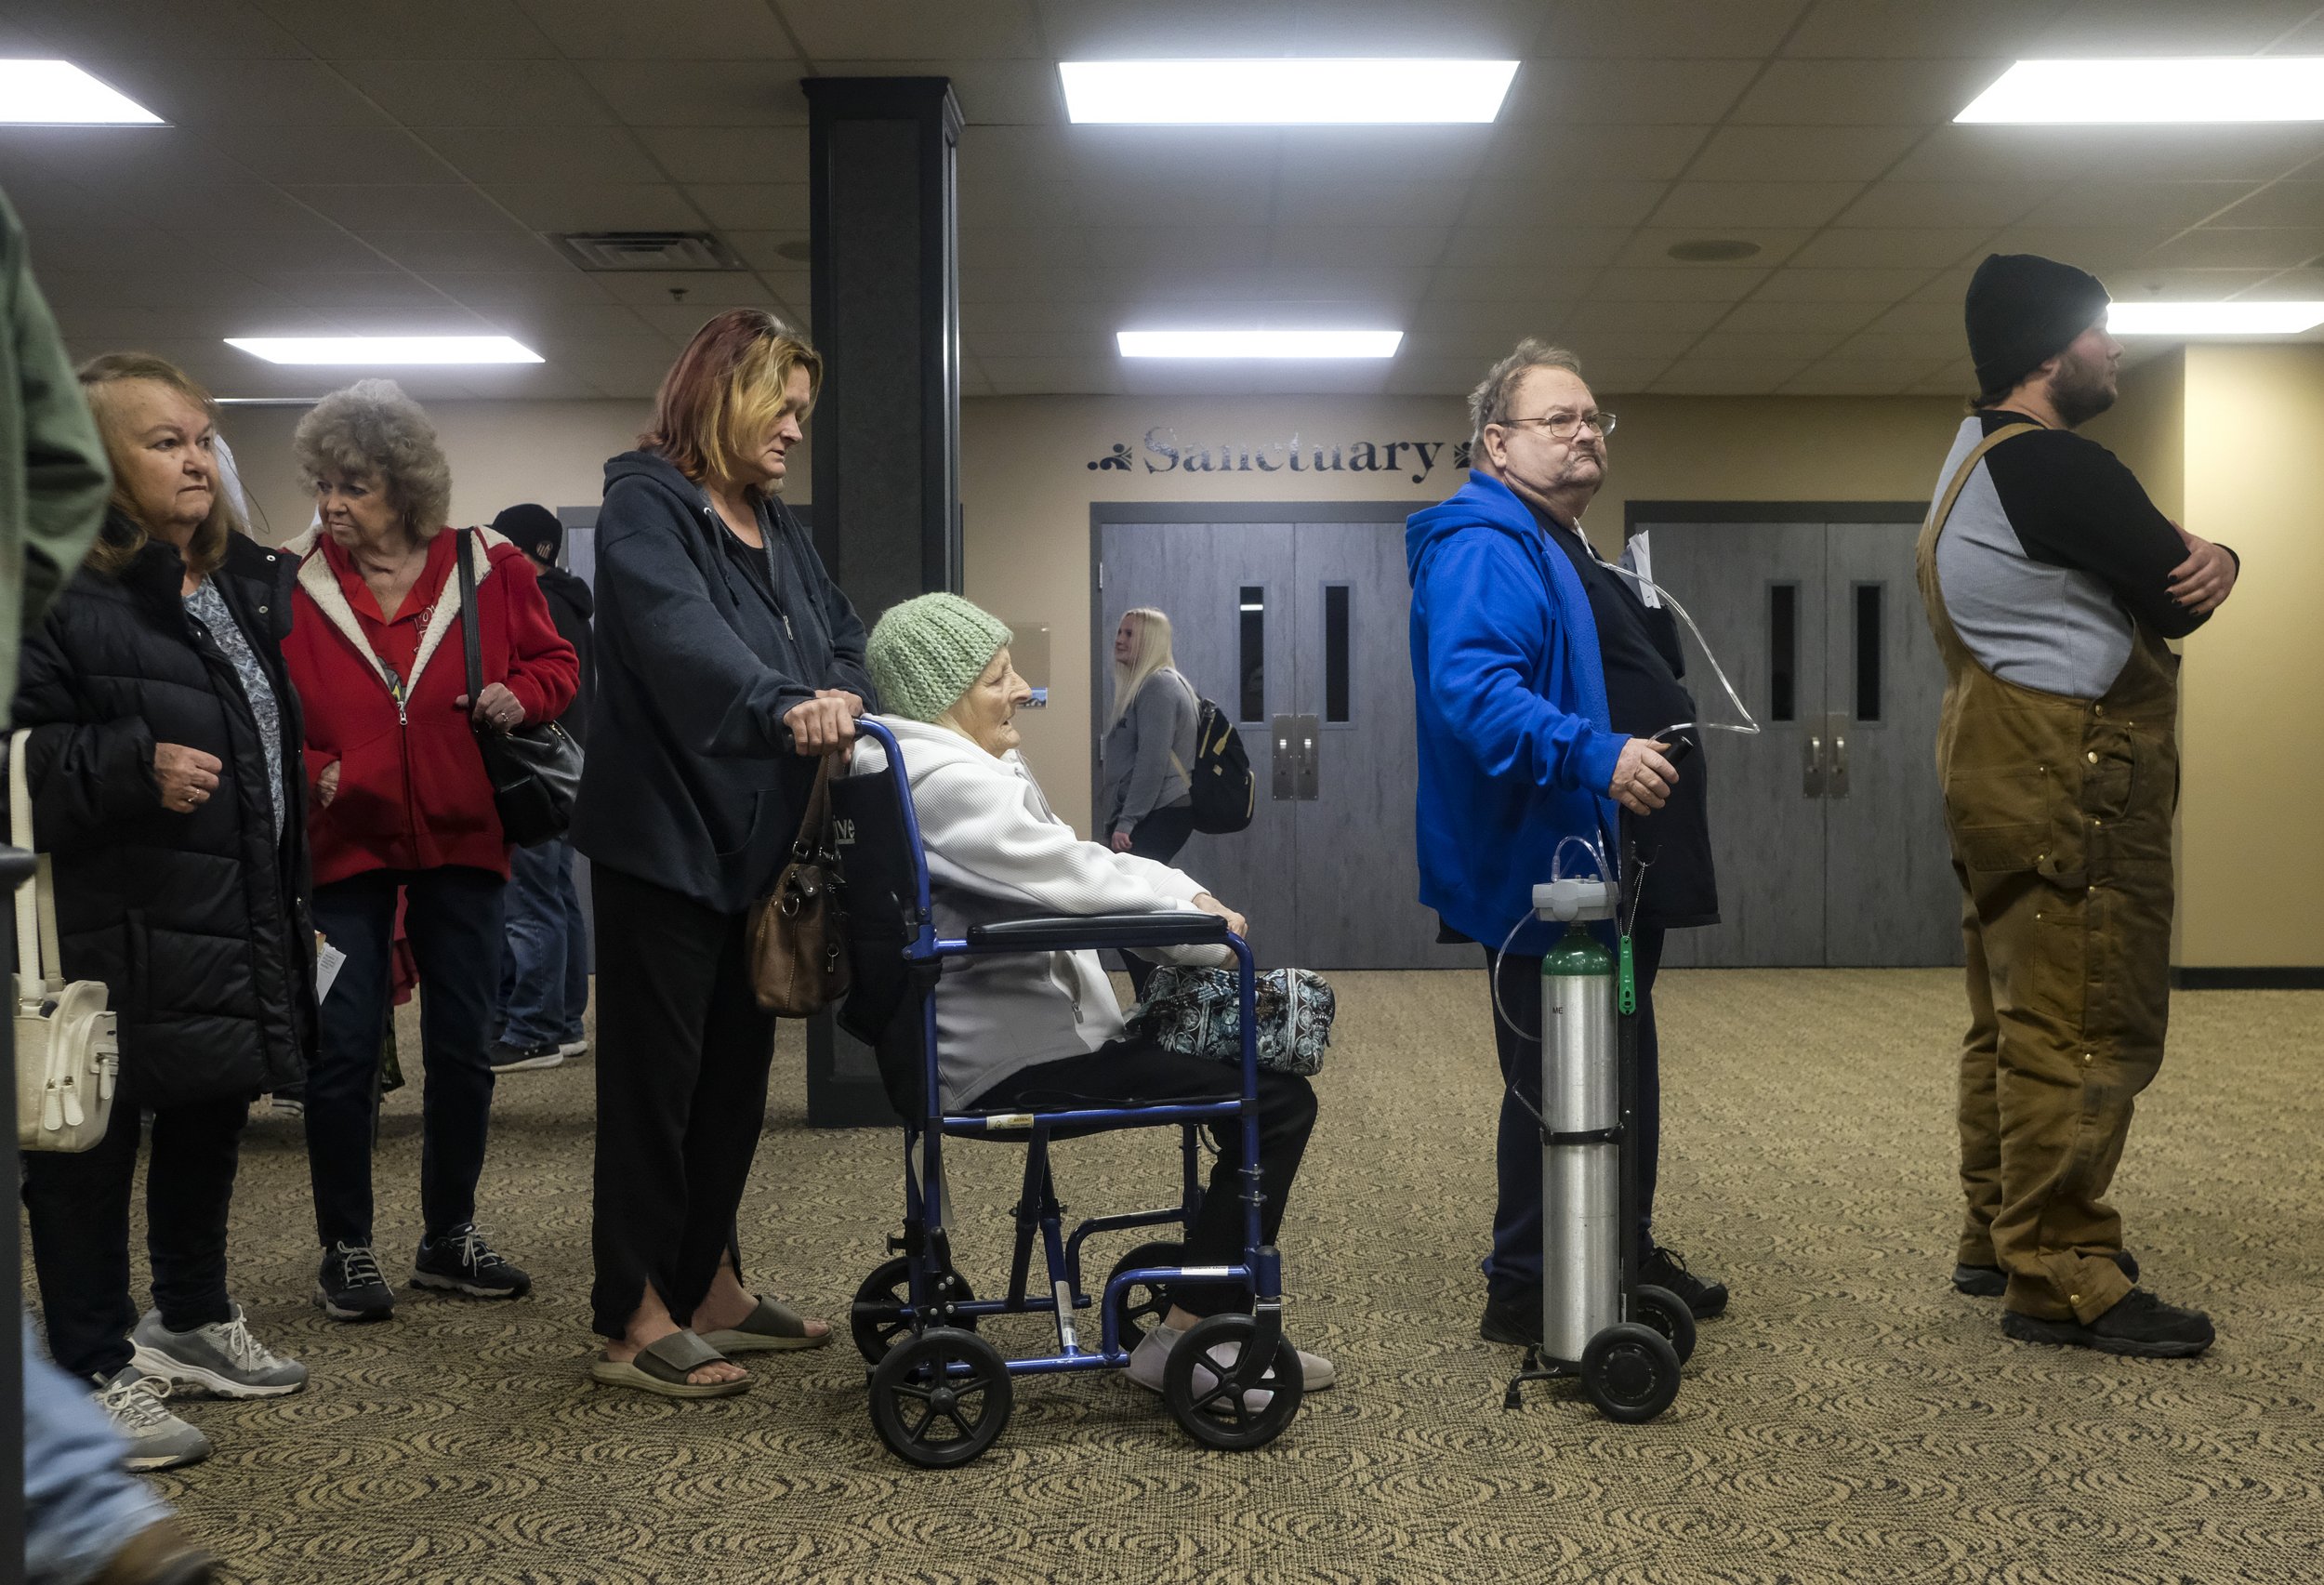  Residents of East Palestine, Ohio line up to receive checks for $1000 as 'inconvenience' compensation from representatives from Norfolk Southern Railway on Friday, February 17, 2023 at the Abundant Life Fellowship church in New Waterford, Ohio. The 